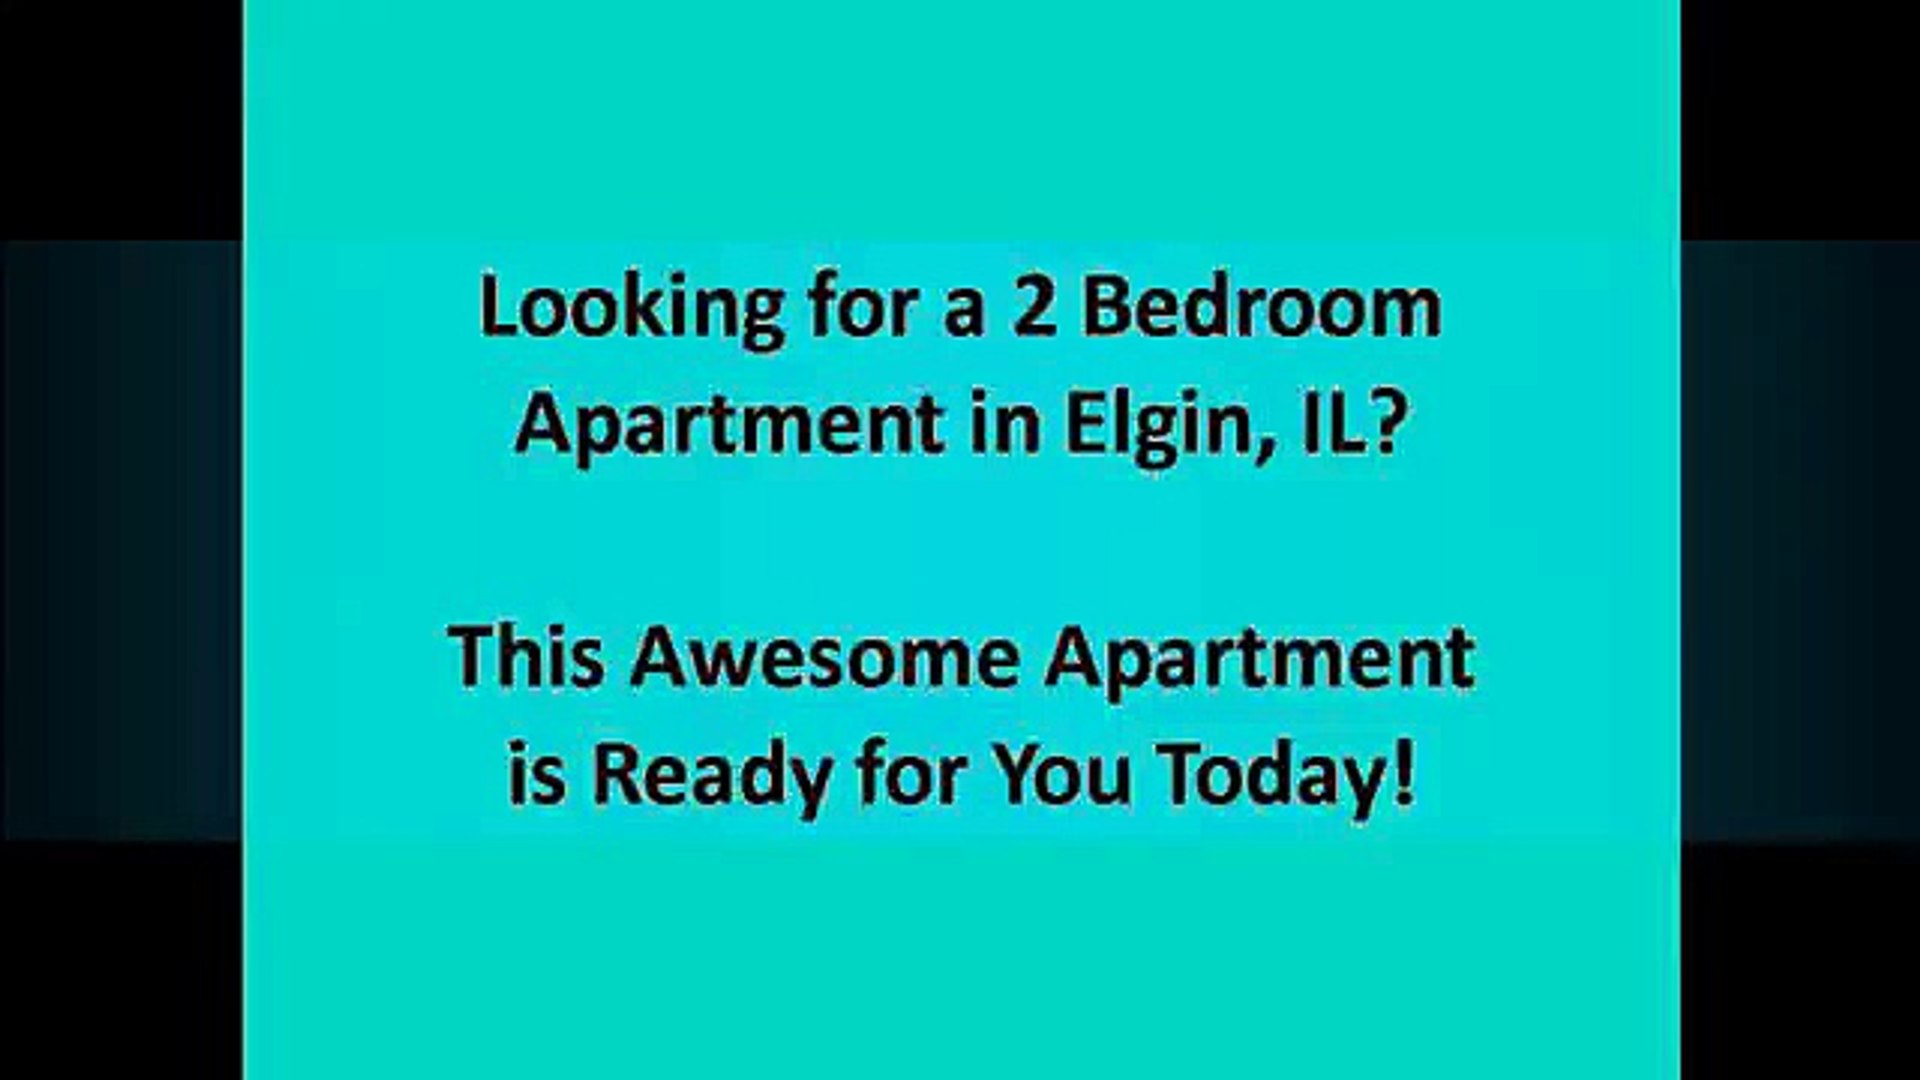 2 Bedroom Apartment For Rent Elgin Il 60123 View It Today Elgin Apartments For Rent